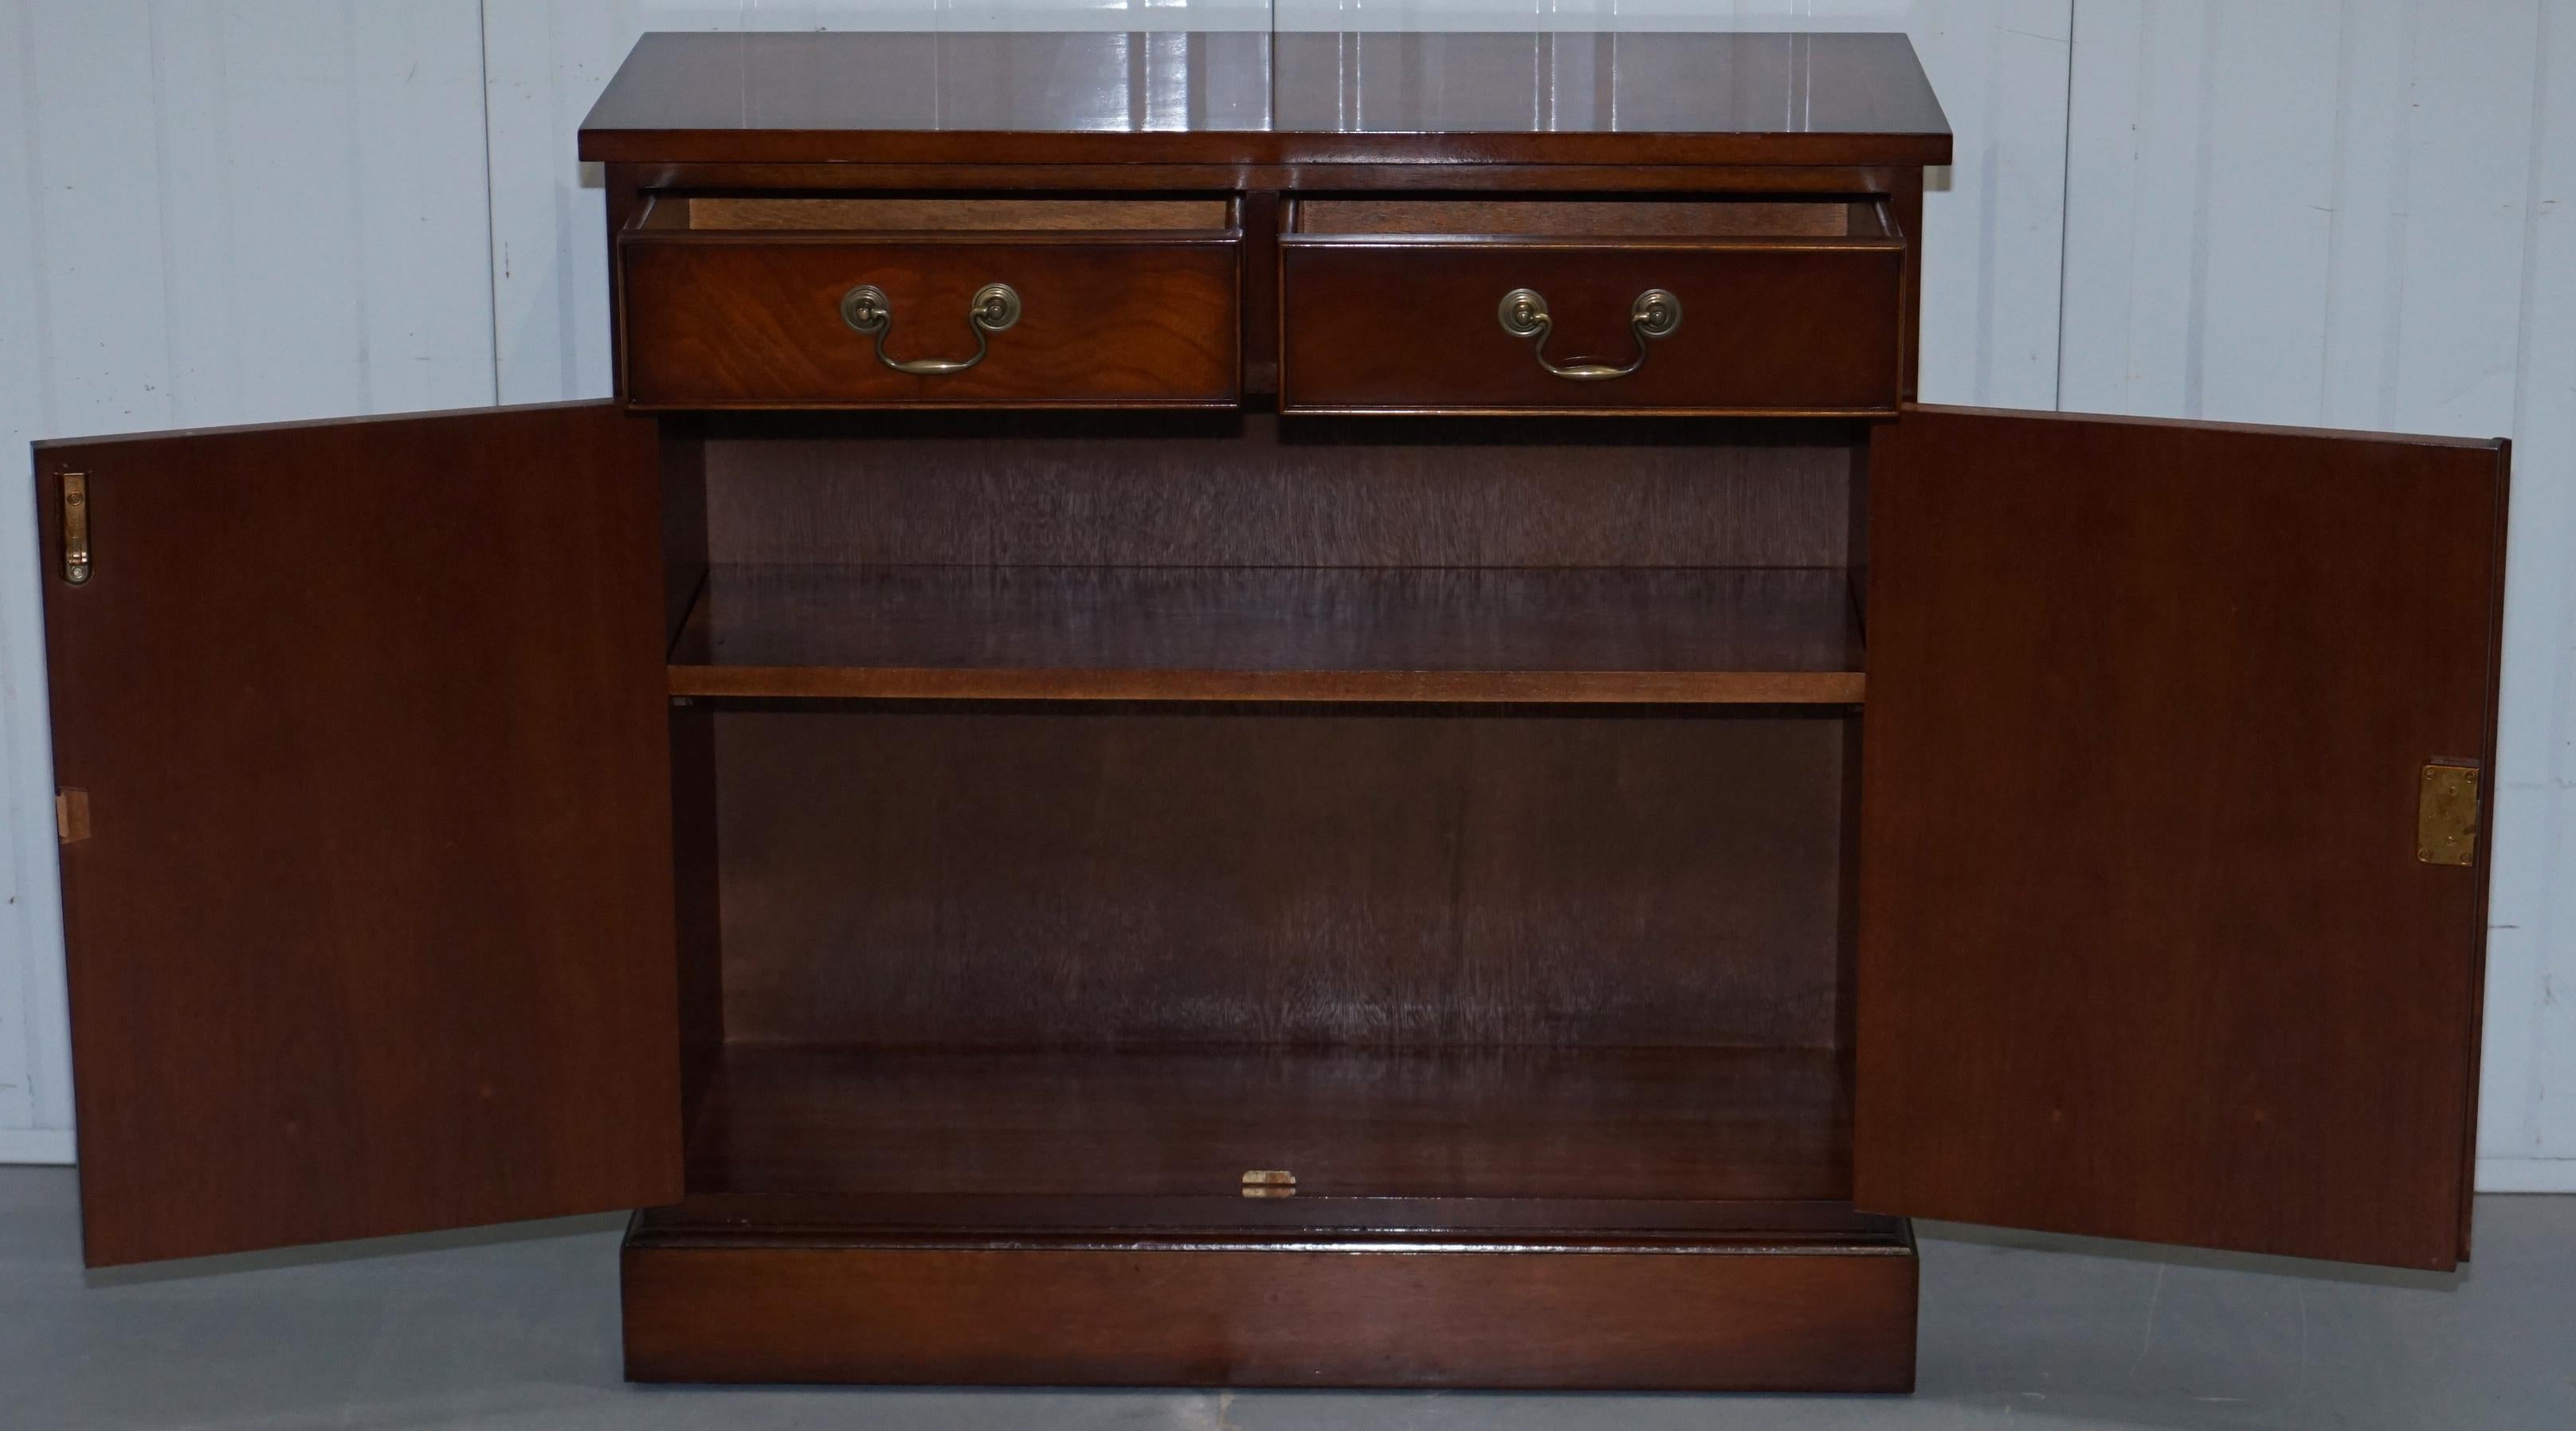 20th Century Pair of Yew Wood Bradley Furniture England Bookcases Cabinet Drawers